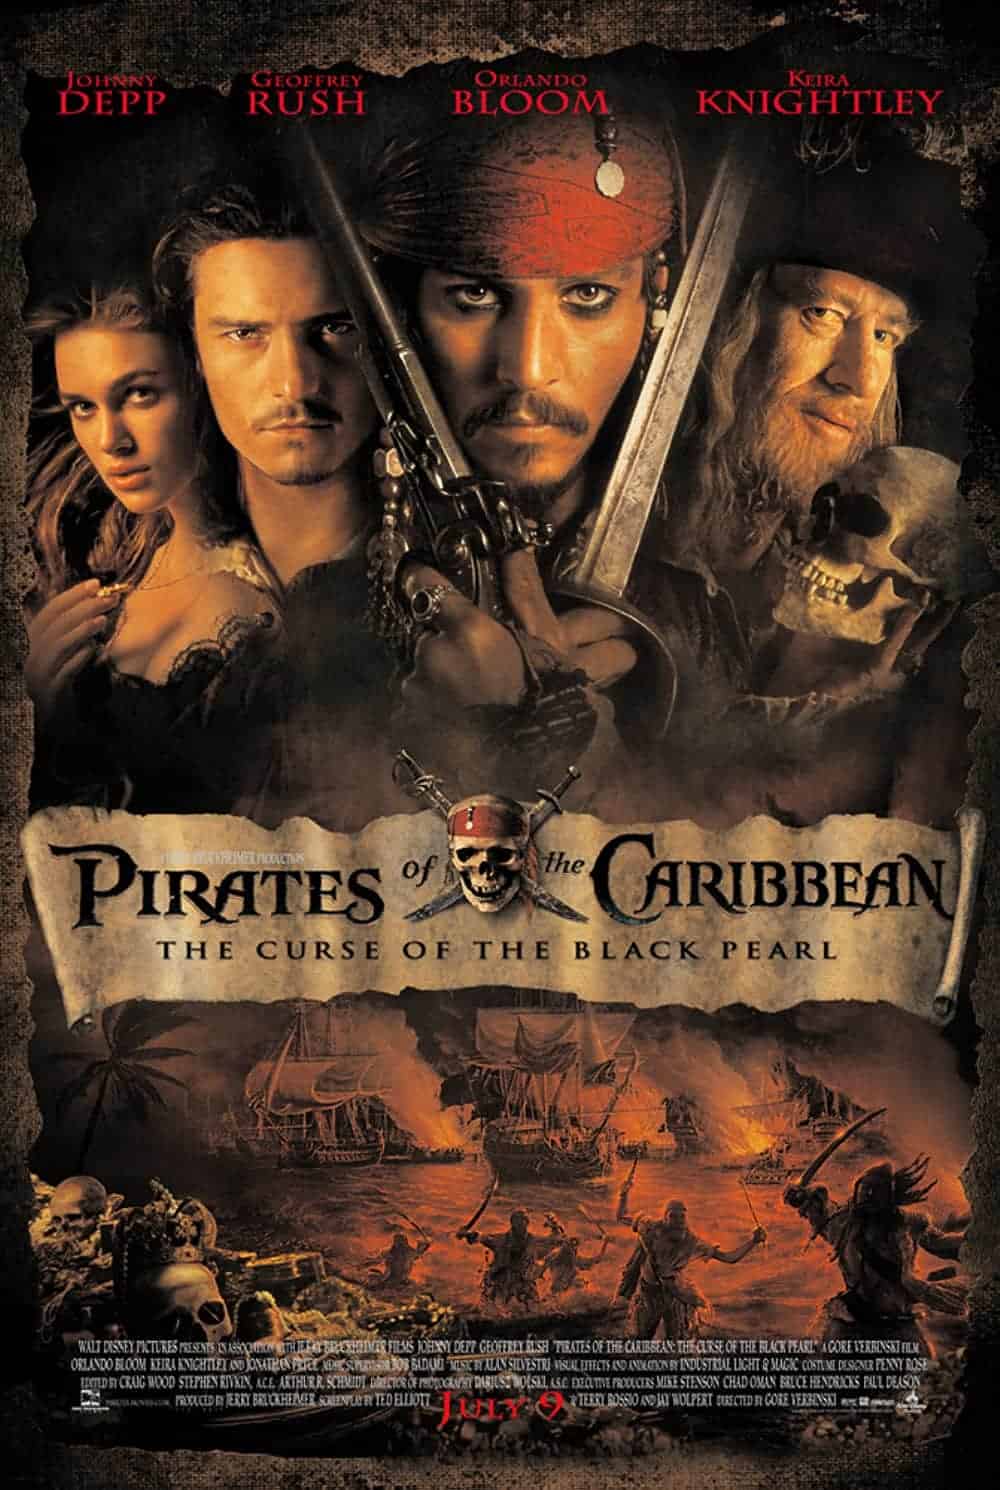 Pirates of the Caribbean (2003) 13 Best Johnny Depp Movies (Ranked)